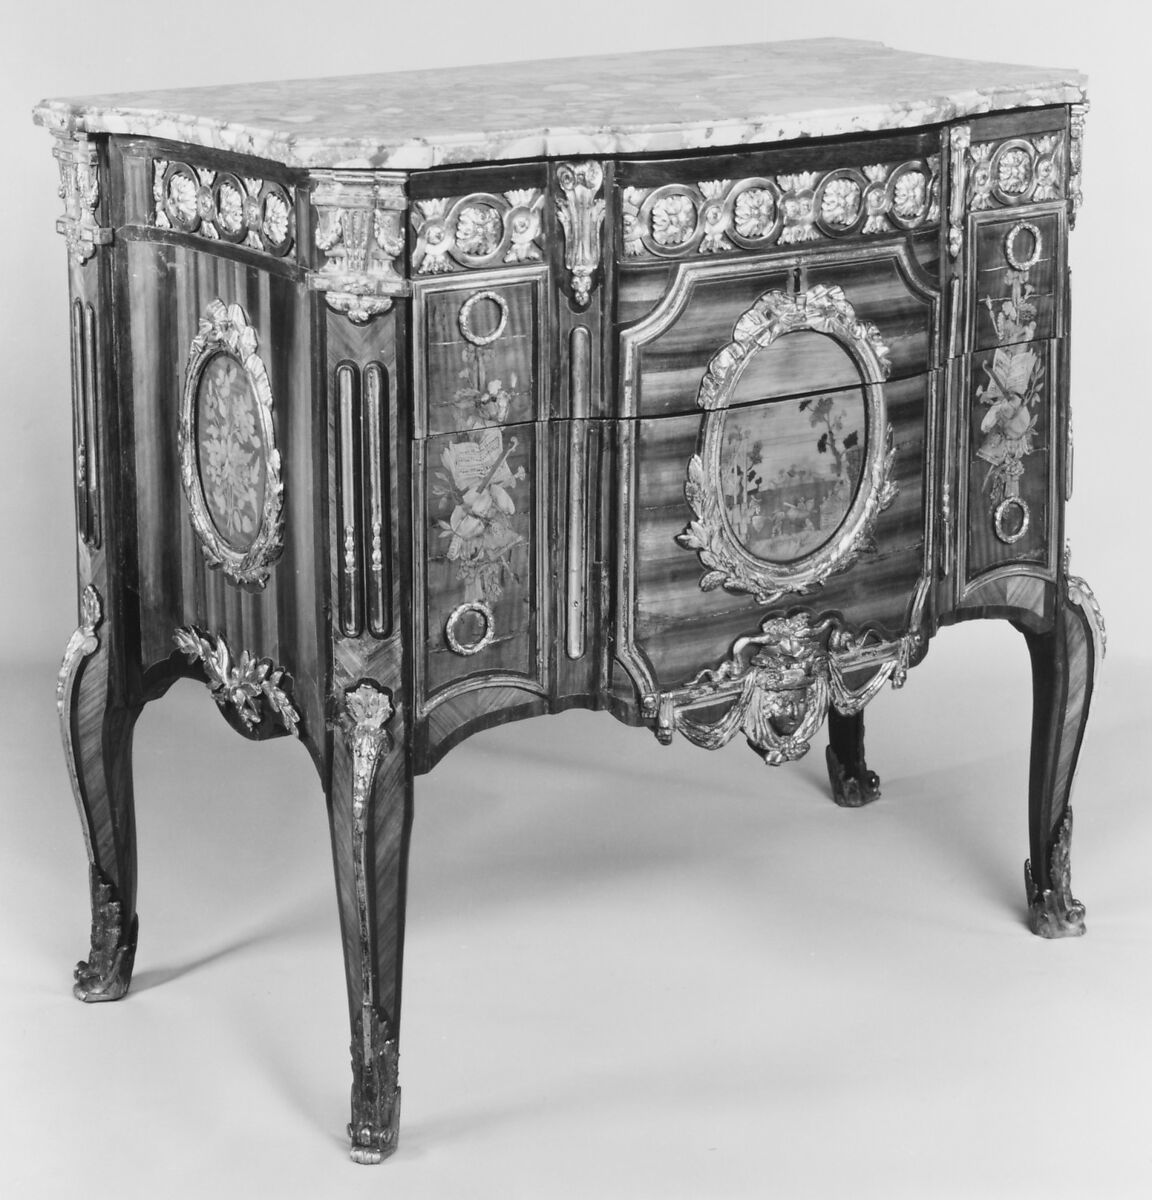 Commode, Pierre Antoine Foullet (master 1765), Marquetry, harewood and various woods; gilt bronze, marble, French, Paris 